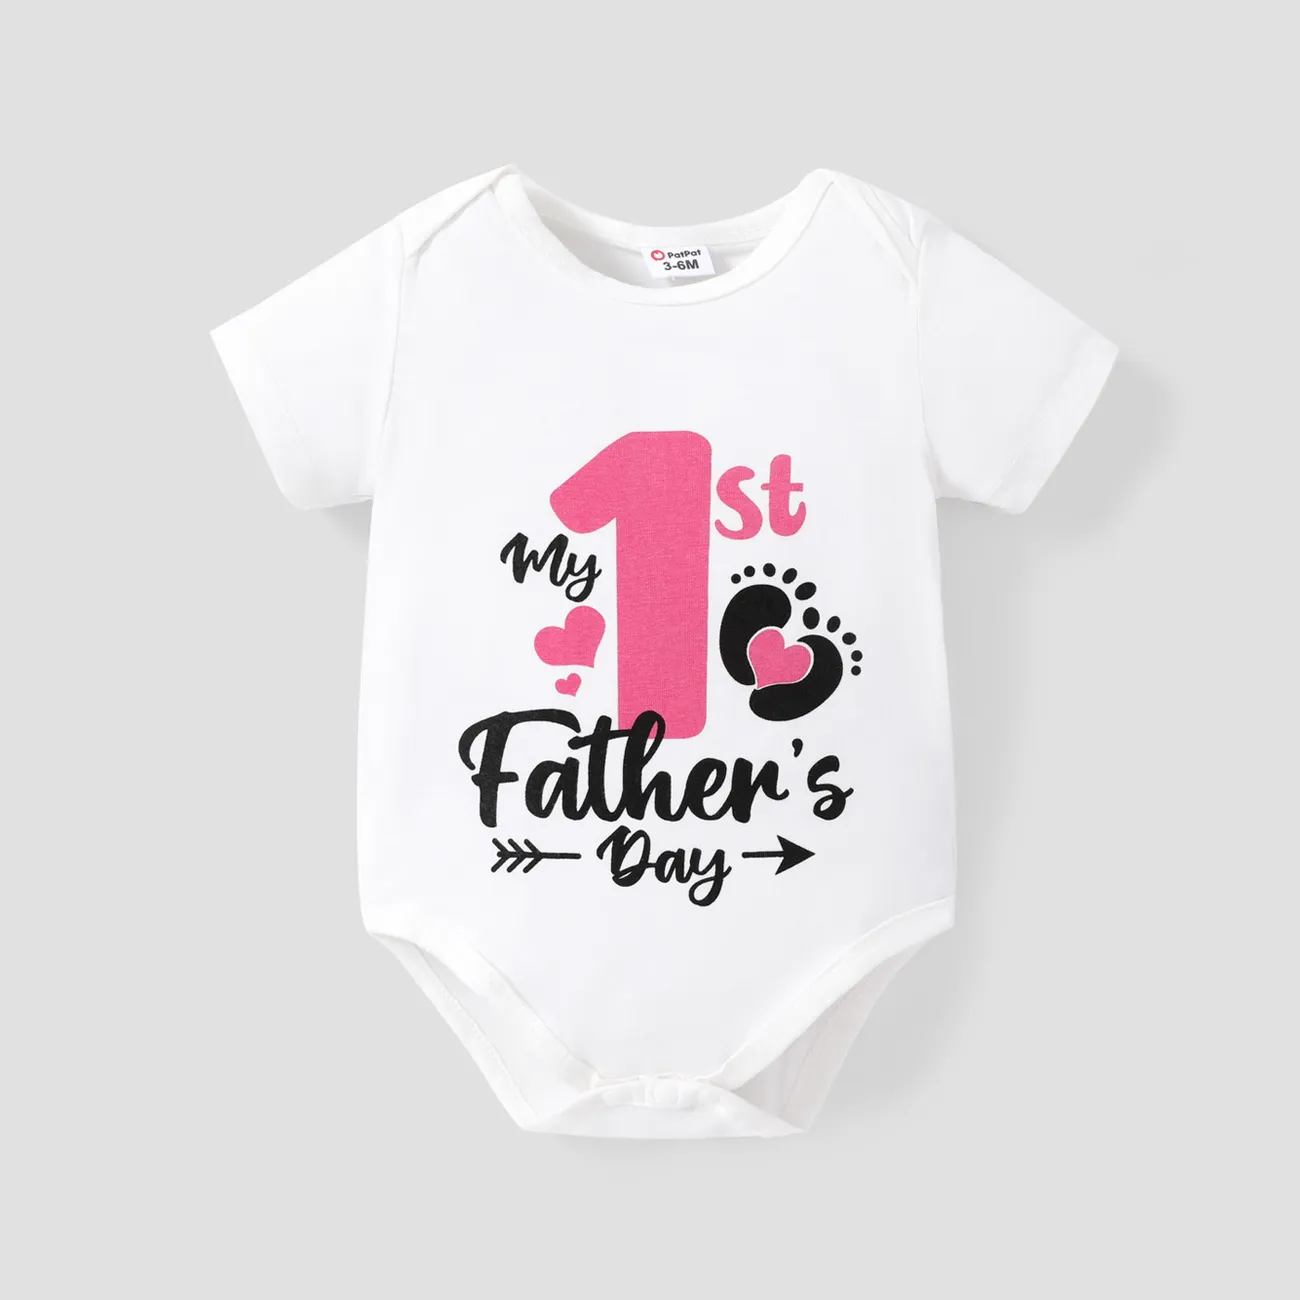 Father's day Baby Girl/Boy Letter & Number Print Romper Pink big image 1